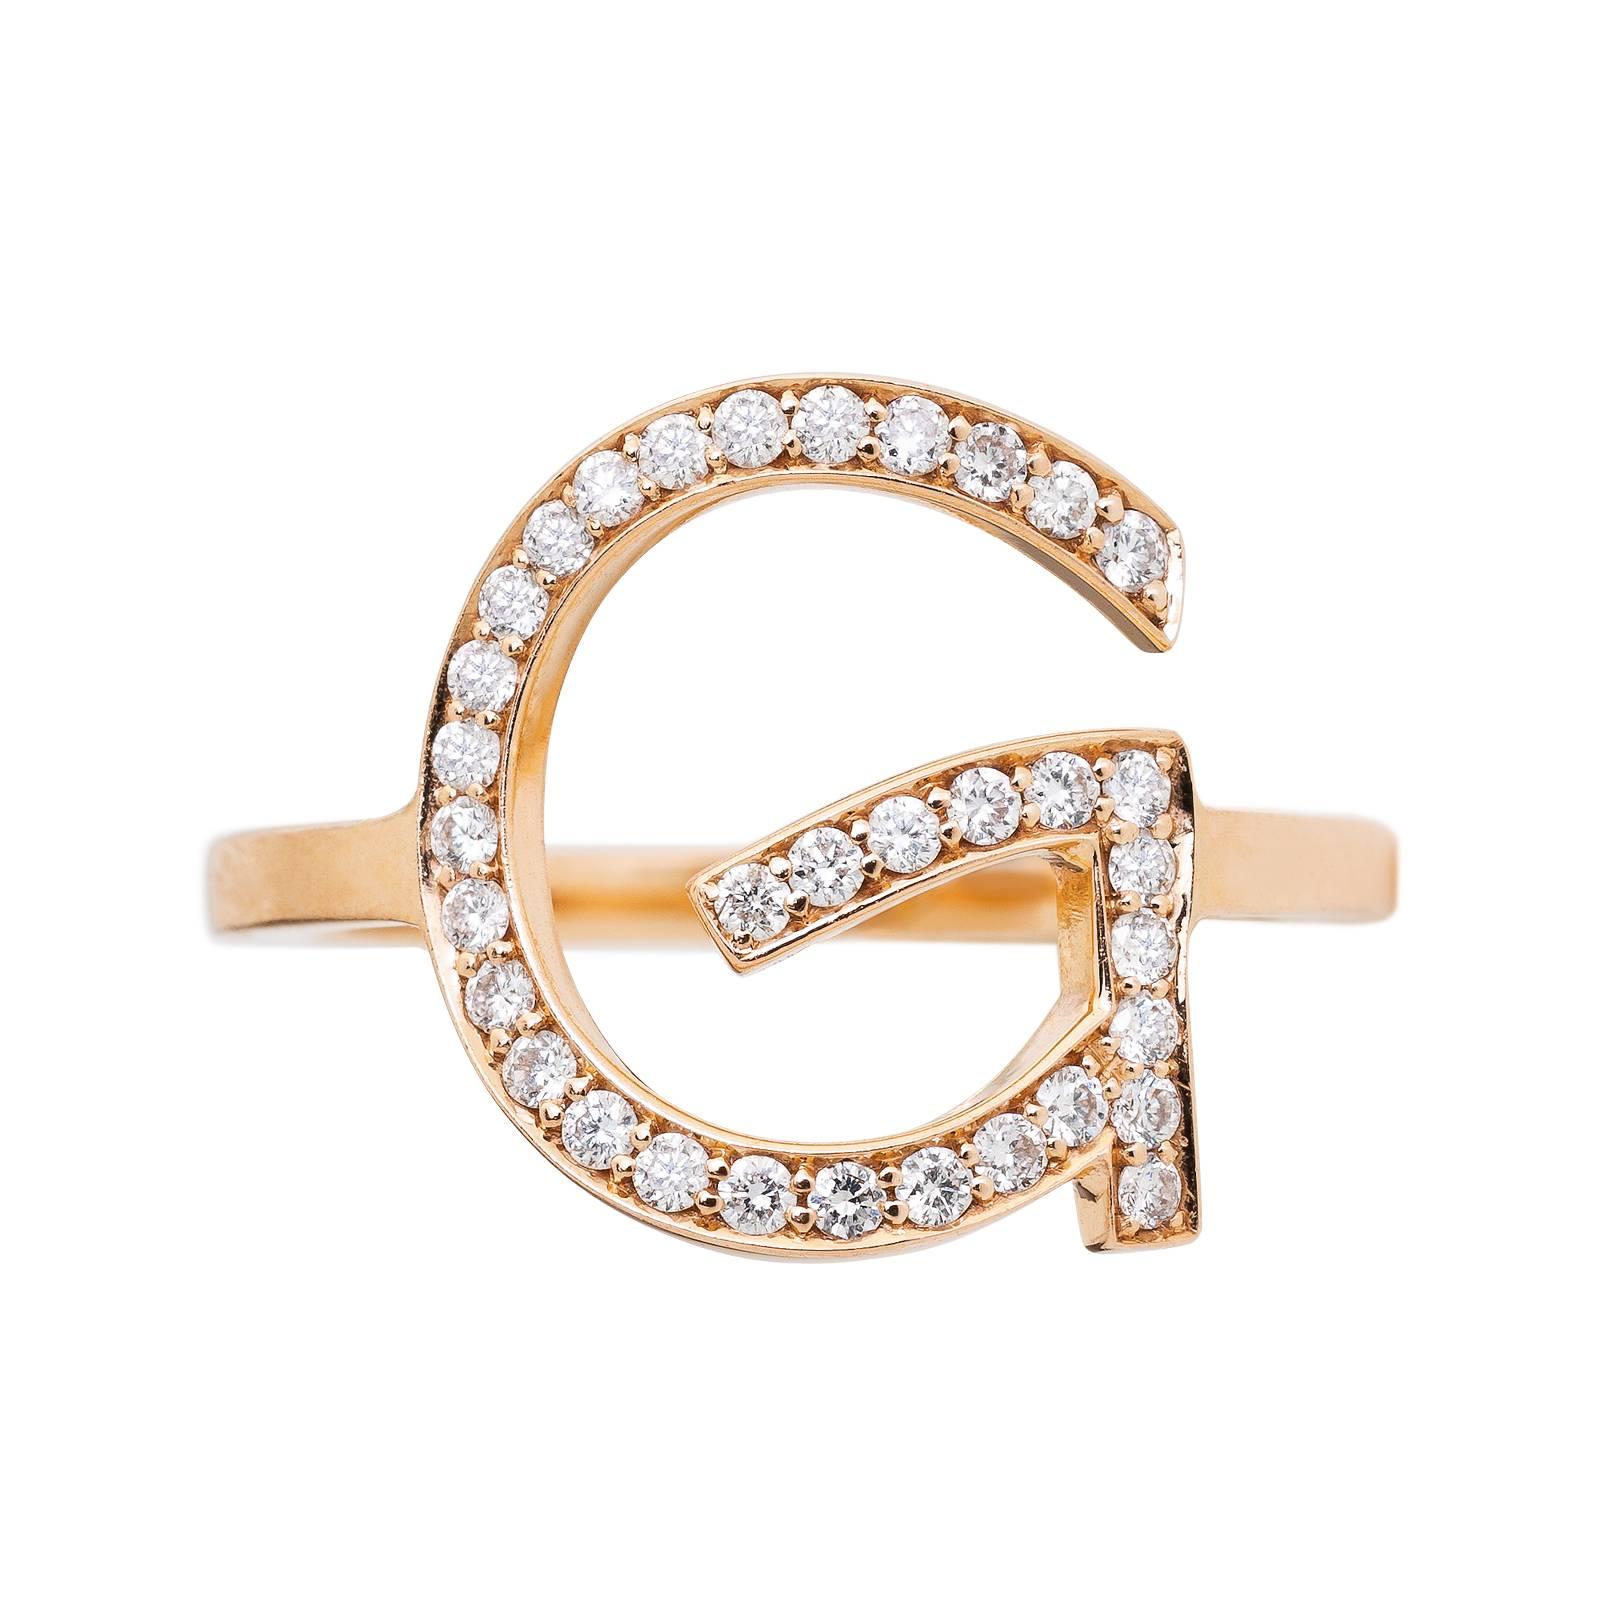 - 18 Karat Rose Gold
- white Diamonds
- 0.30 Carat

Are you looking for a personal gift for your loved once? Then you are definitely looking for the right piece. Special- Authentic& Brilliant. Perfect Present for a Wedding Day, Birthday Present,